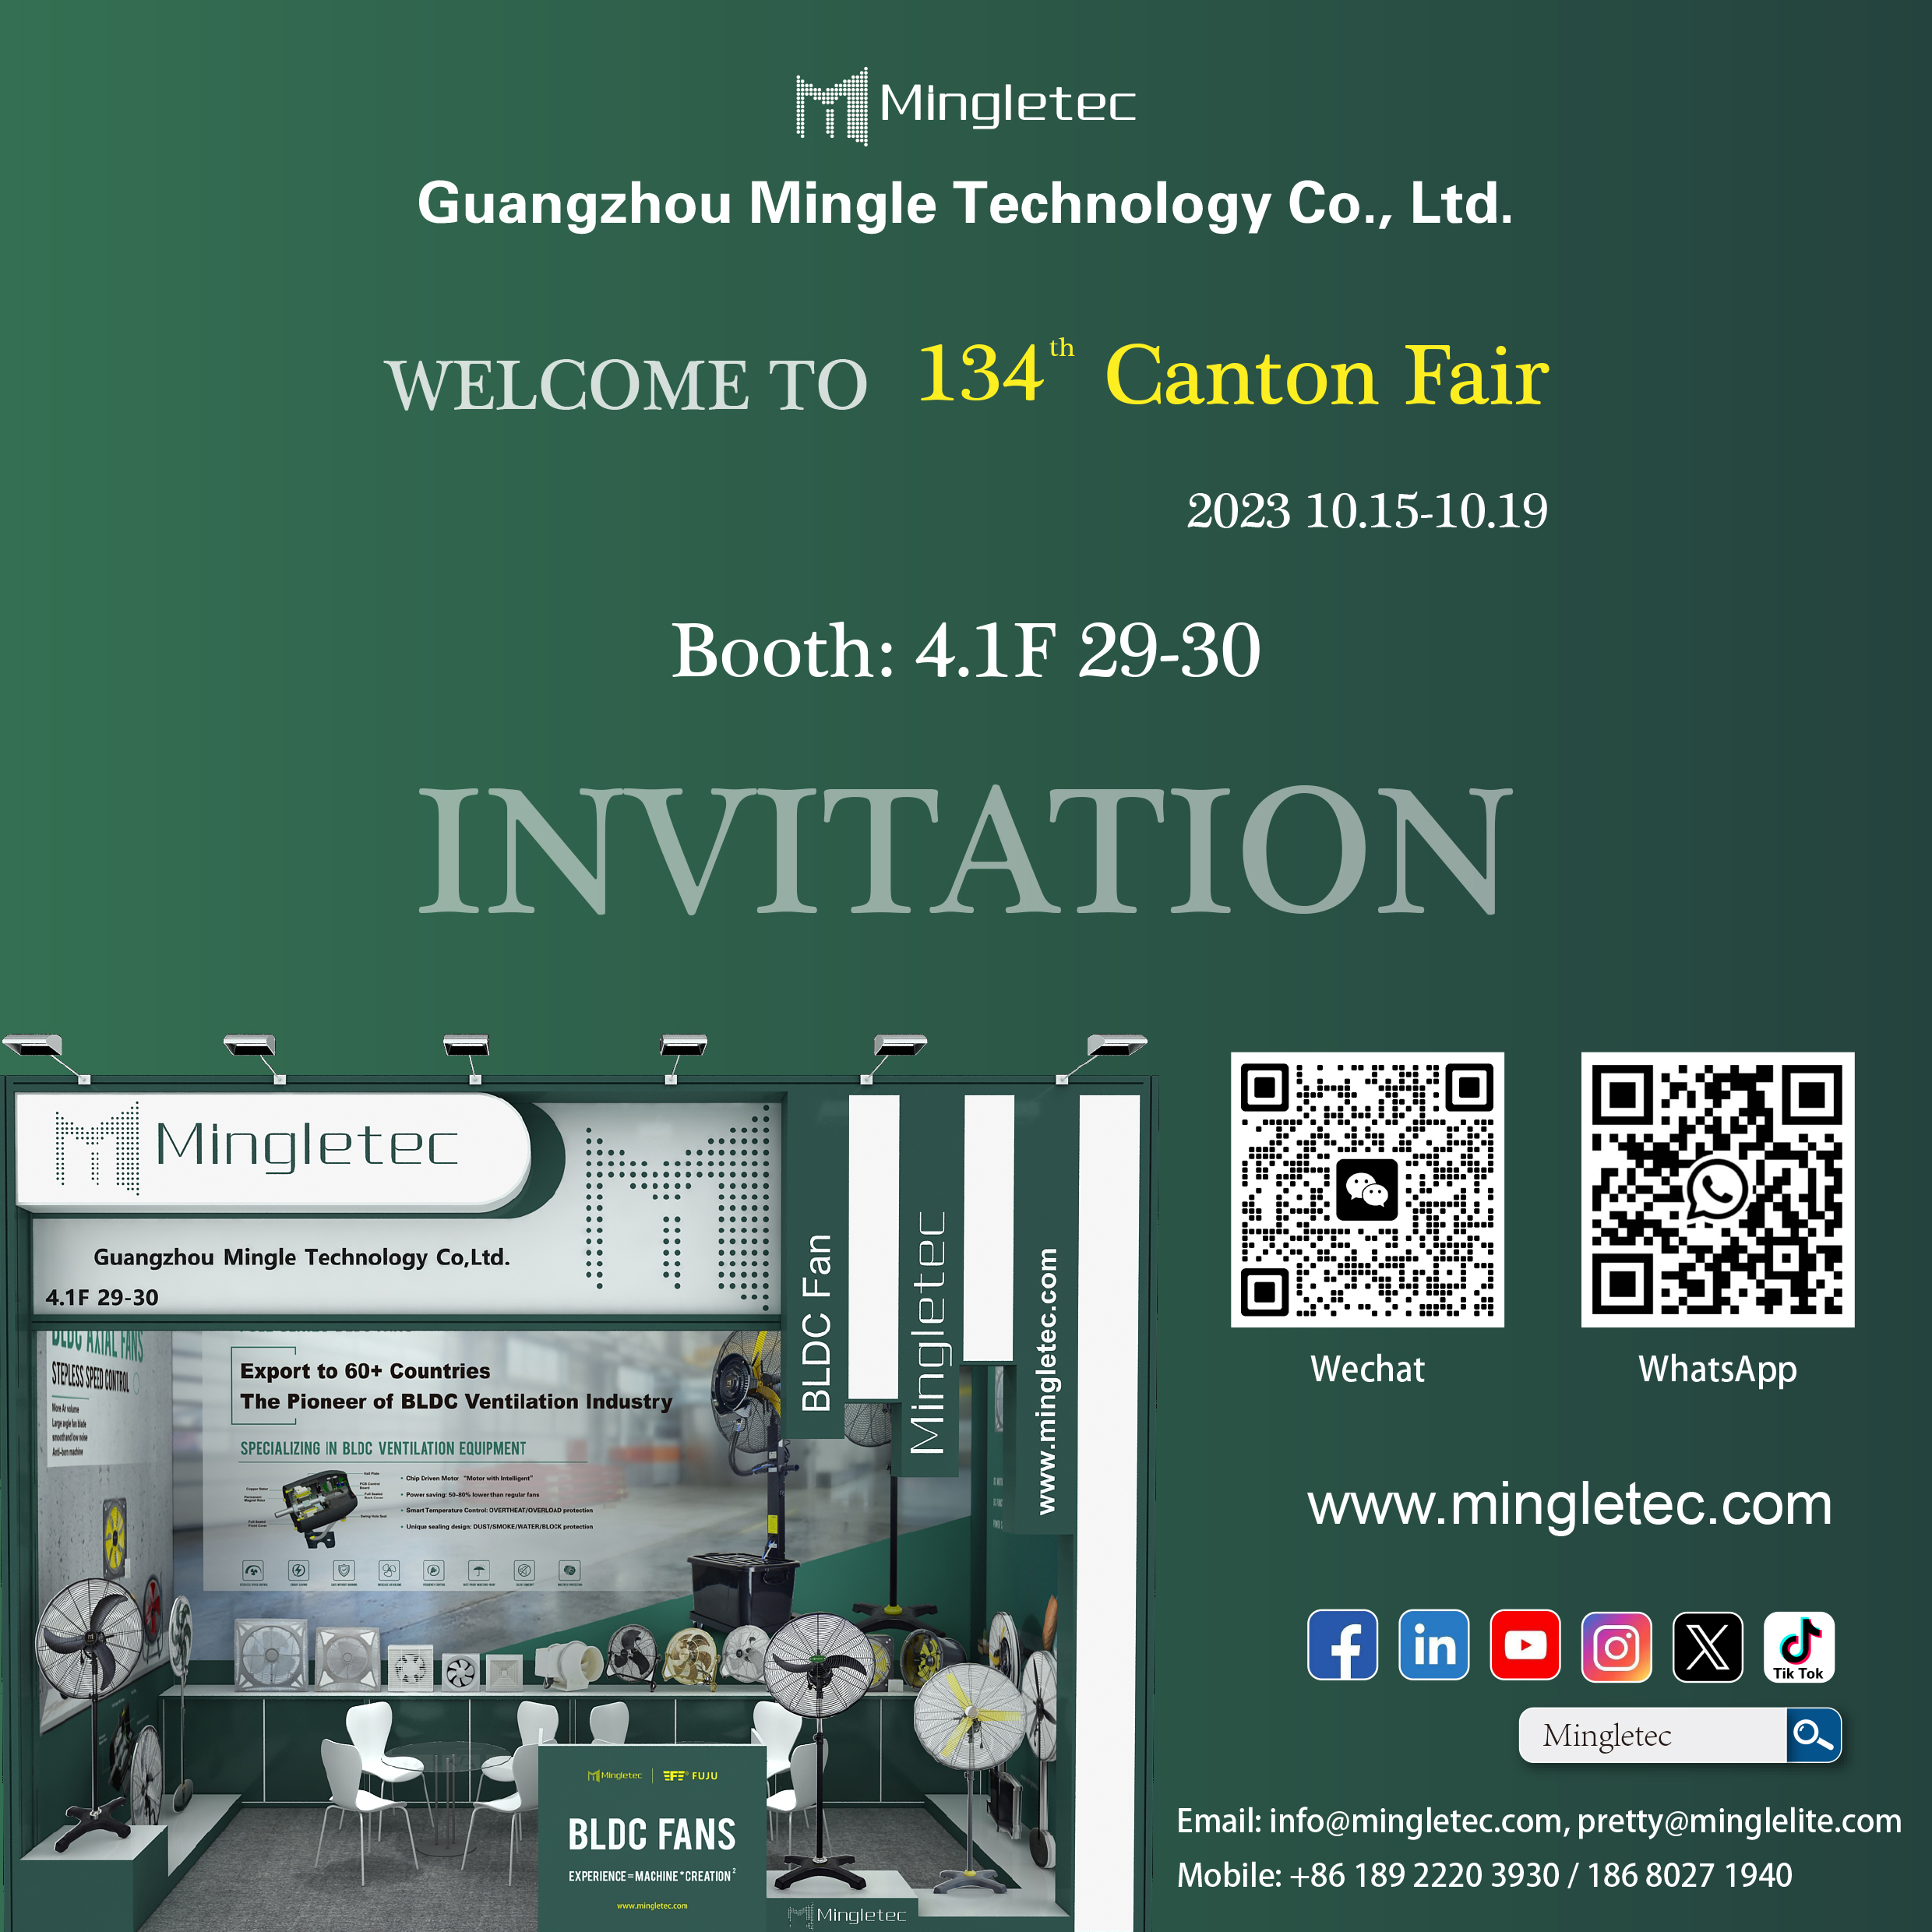 The 134th Canton Fair Invitation by Mingletec--industrial fans exhibition